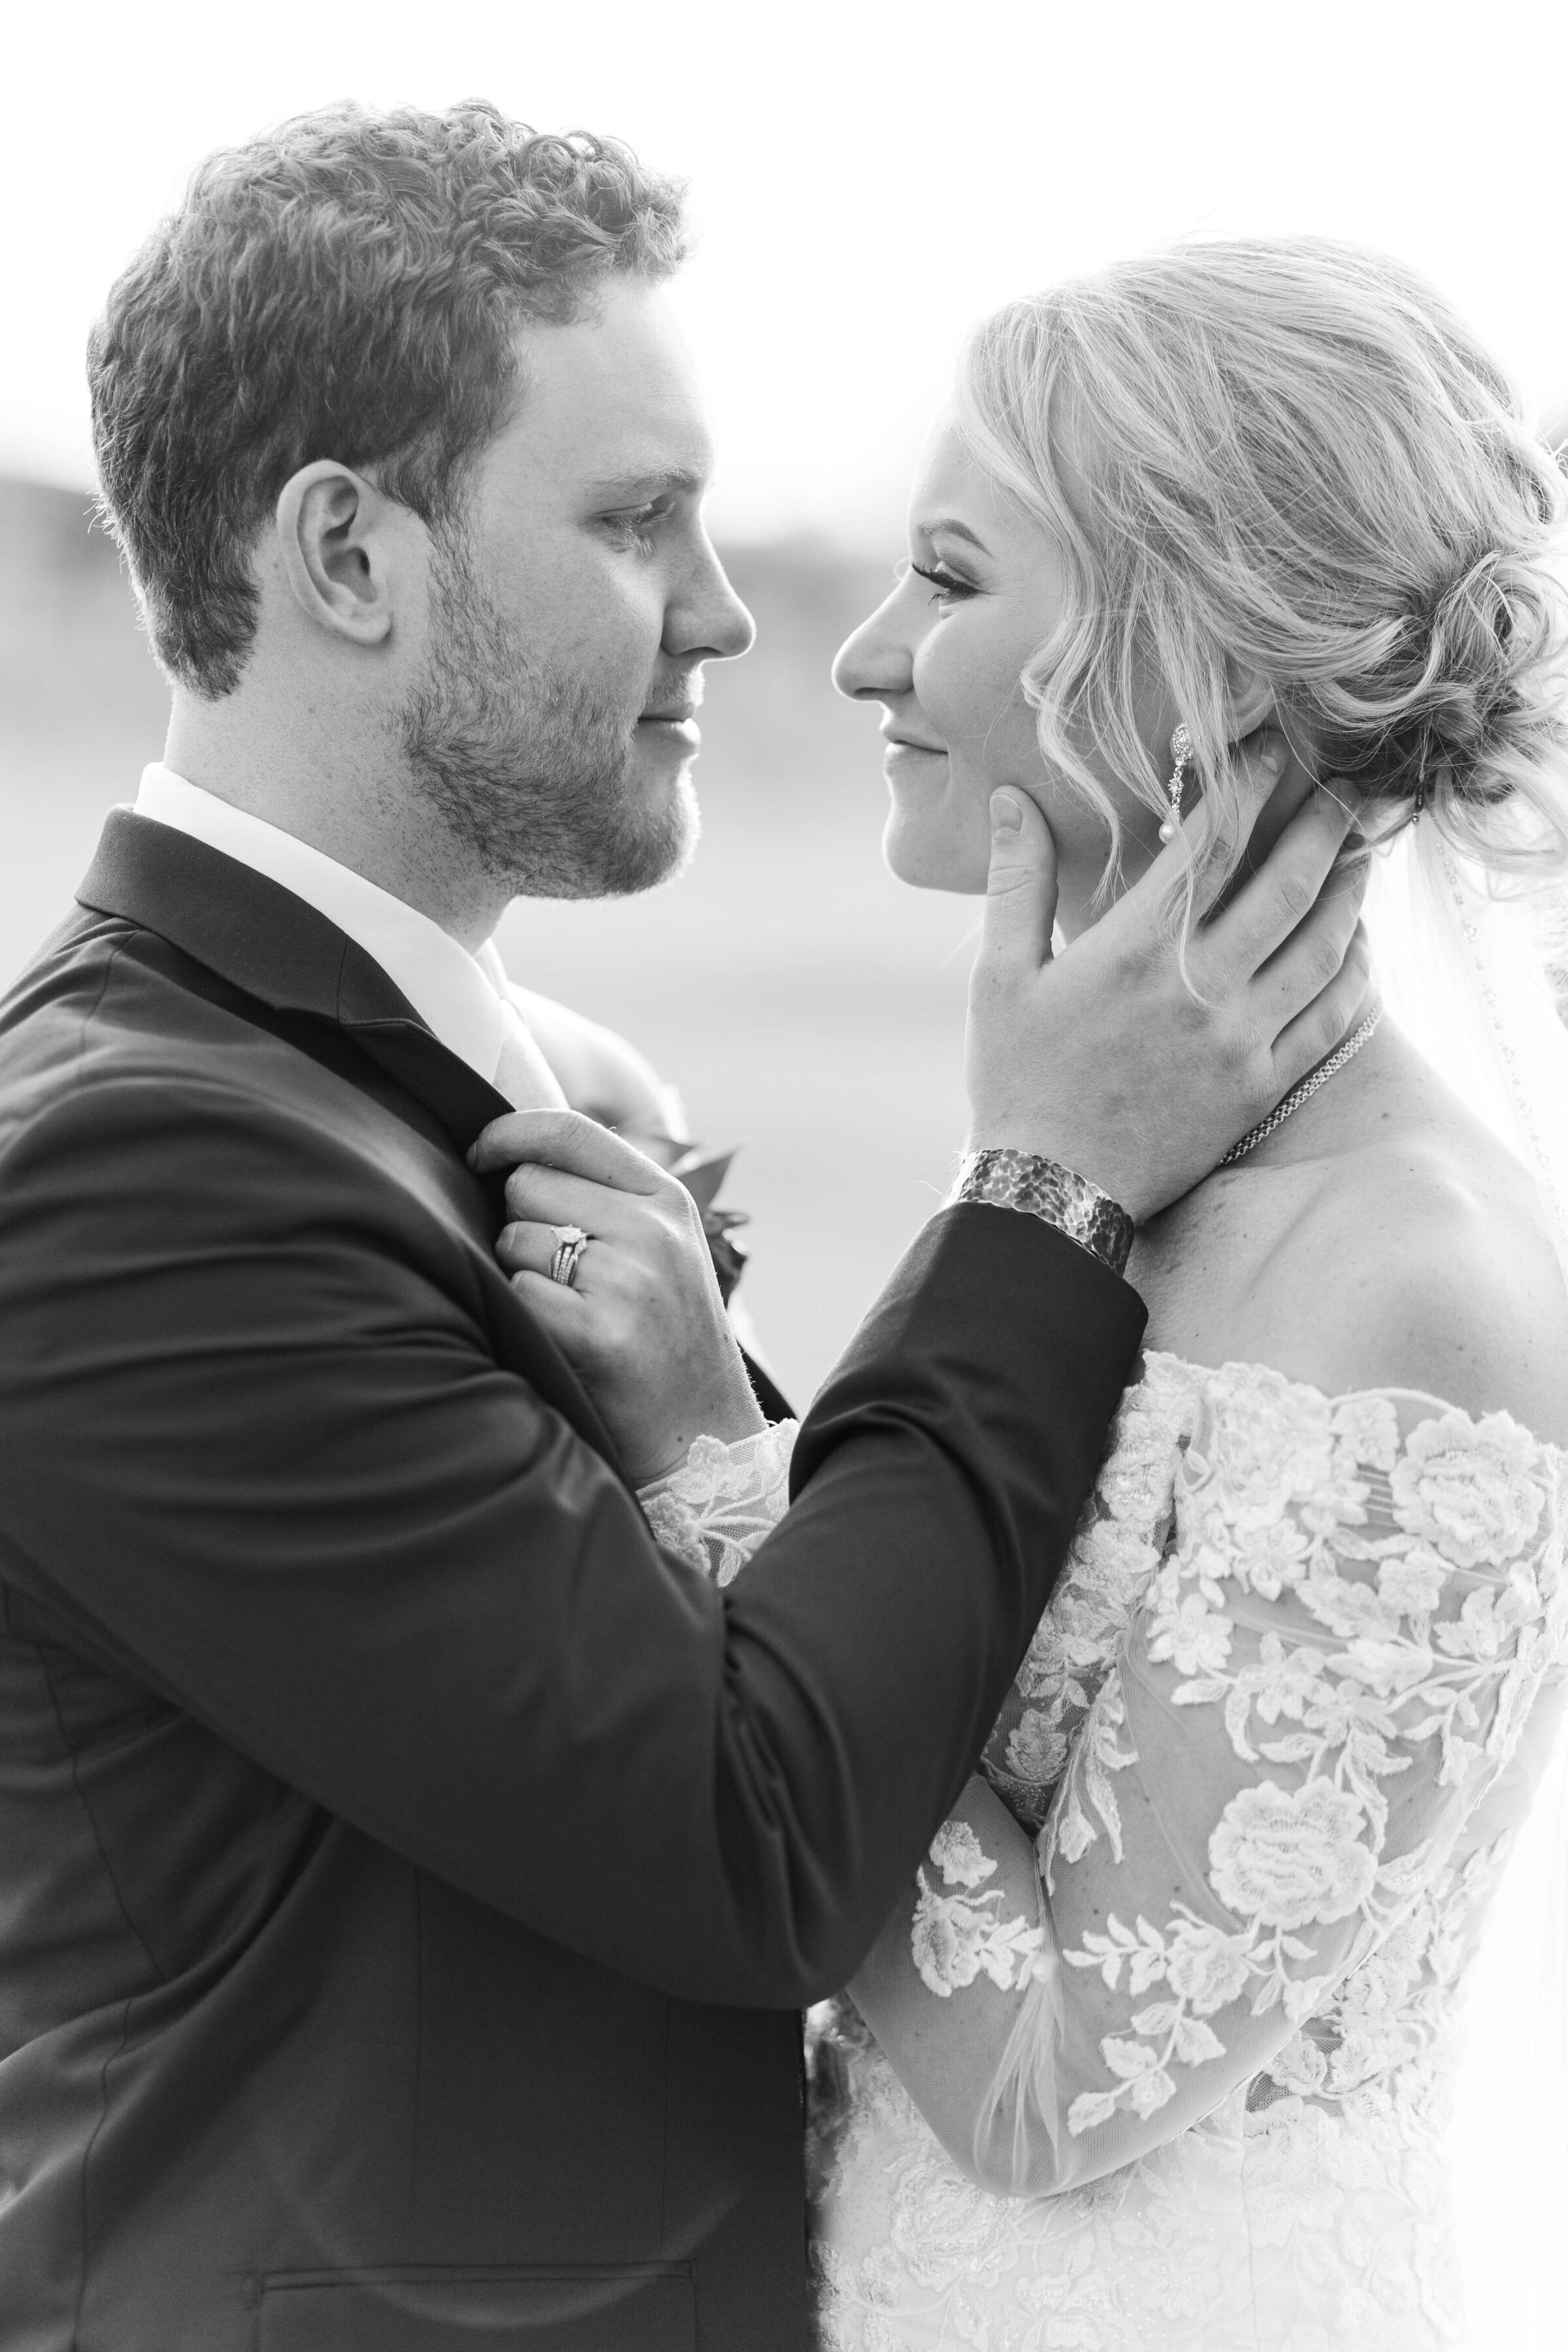 A black and white image of a groom and bride standing looking at each other. The groom has his hand on his bride's face as they come in for a kiss.